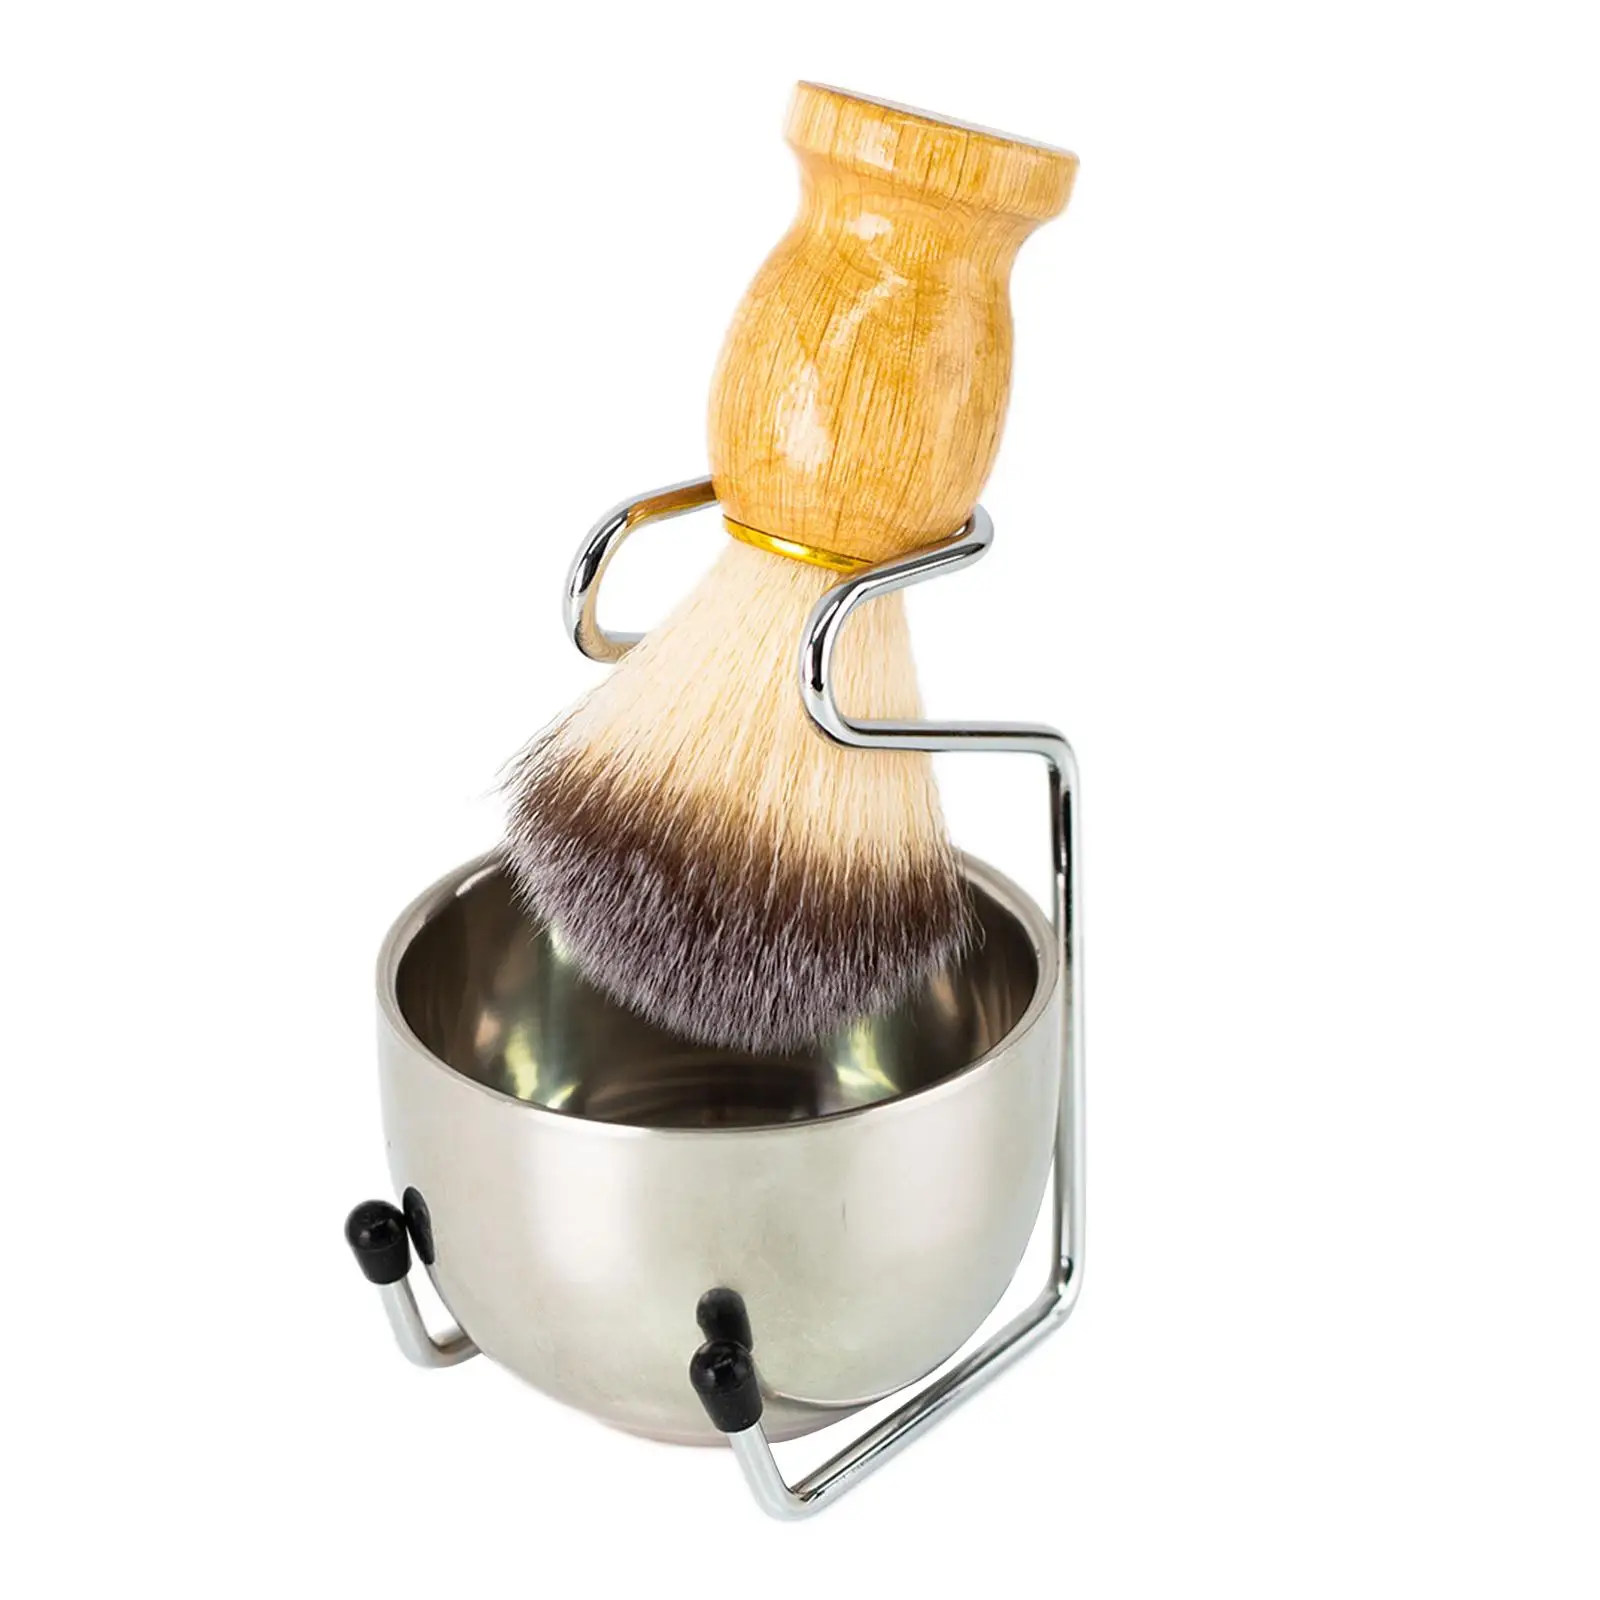 Wet Shaving Kit with Shave Brush Stand Mug, Perfect for Wet Shave Durable Comfortable